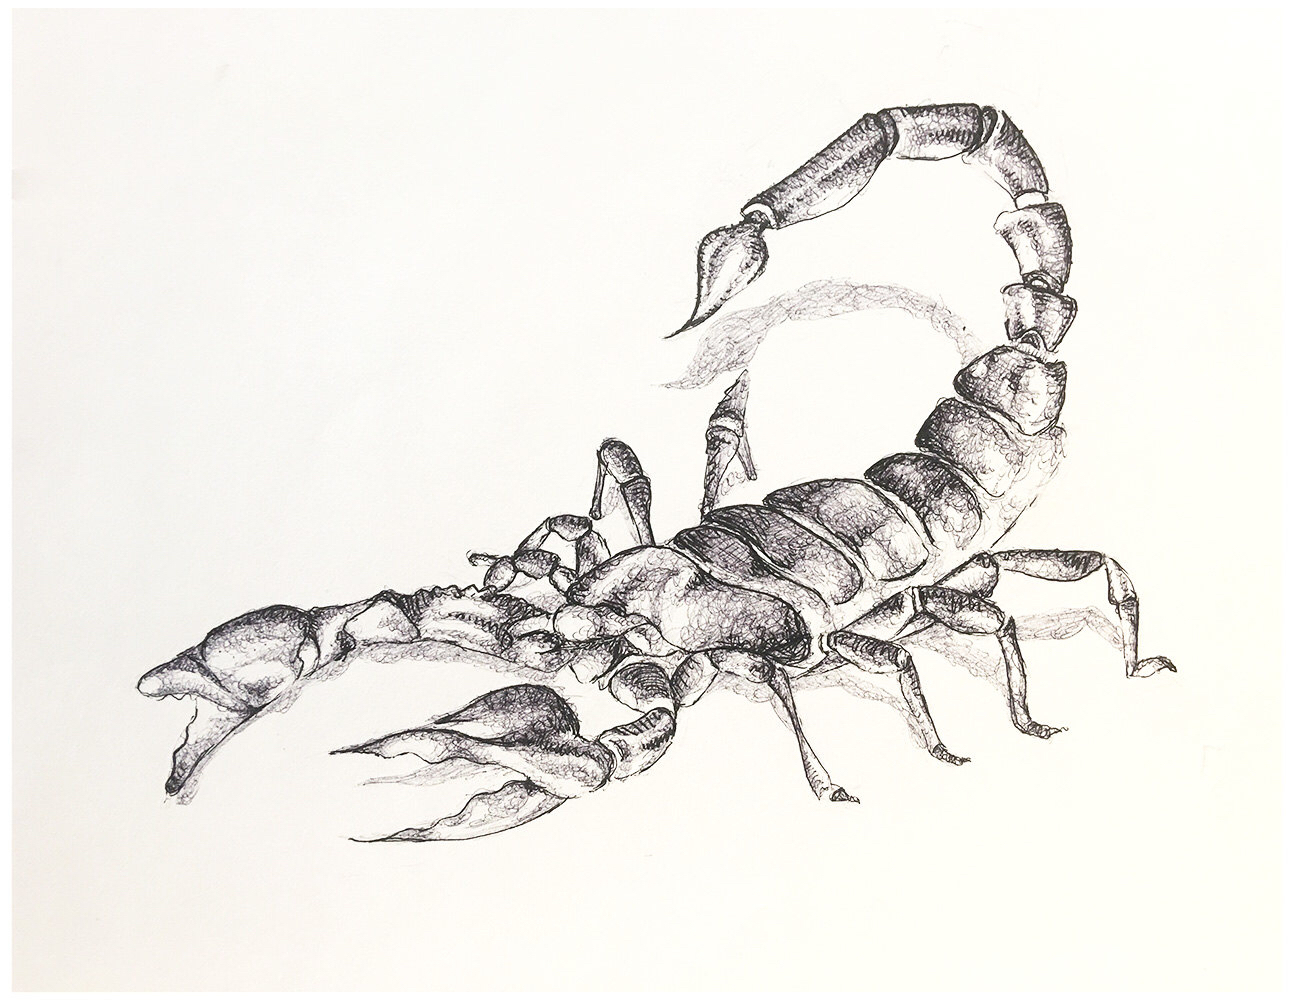 Scorpion Pencil Sketch at Explore collection of